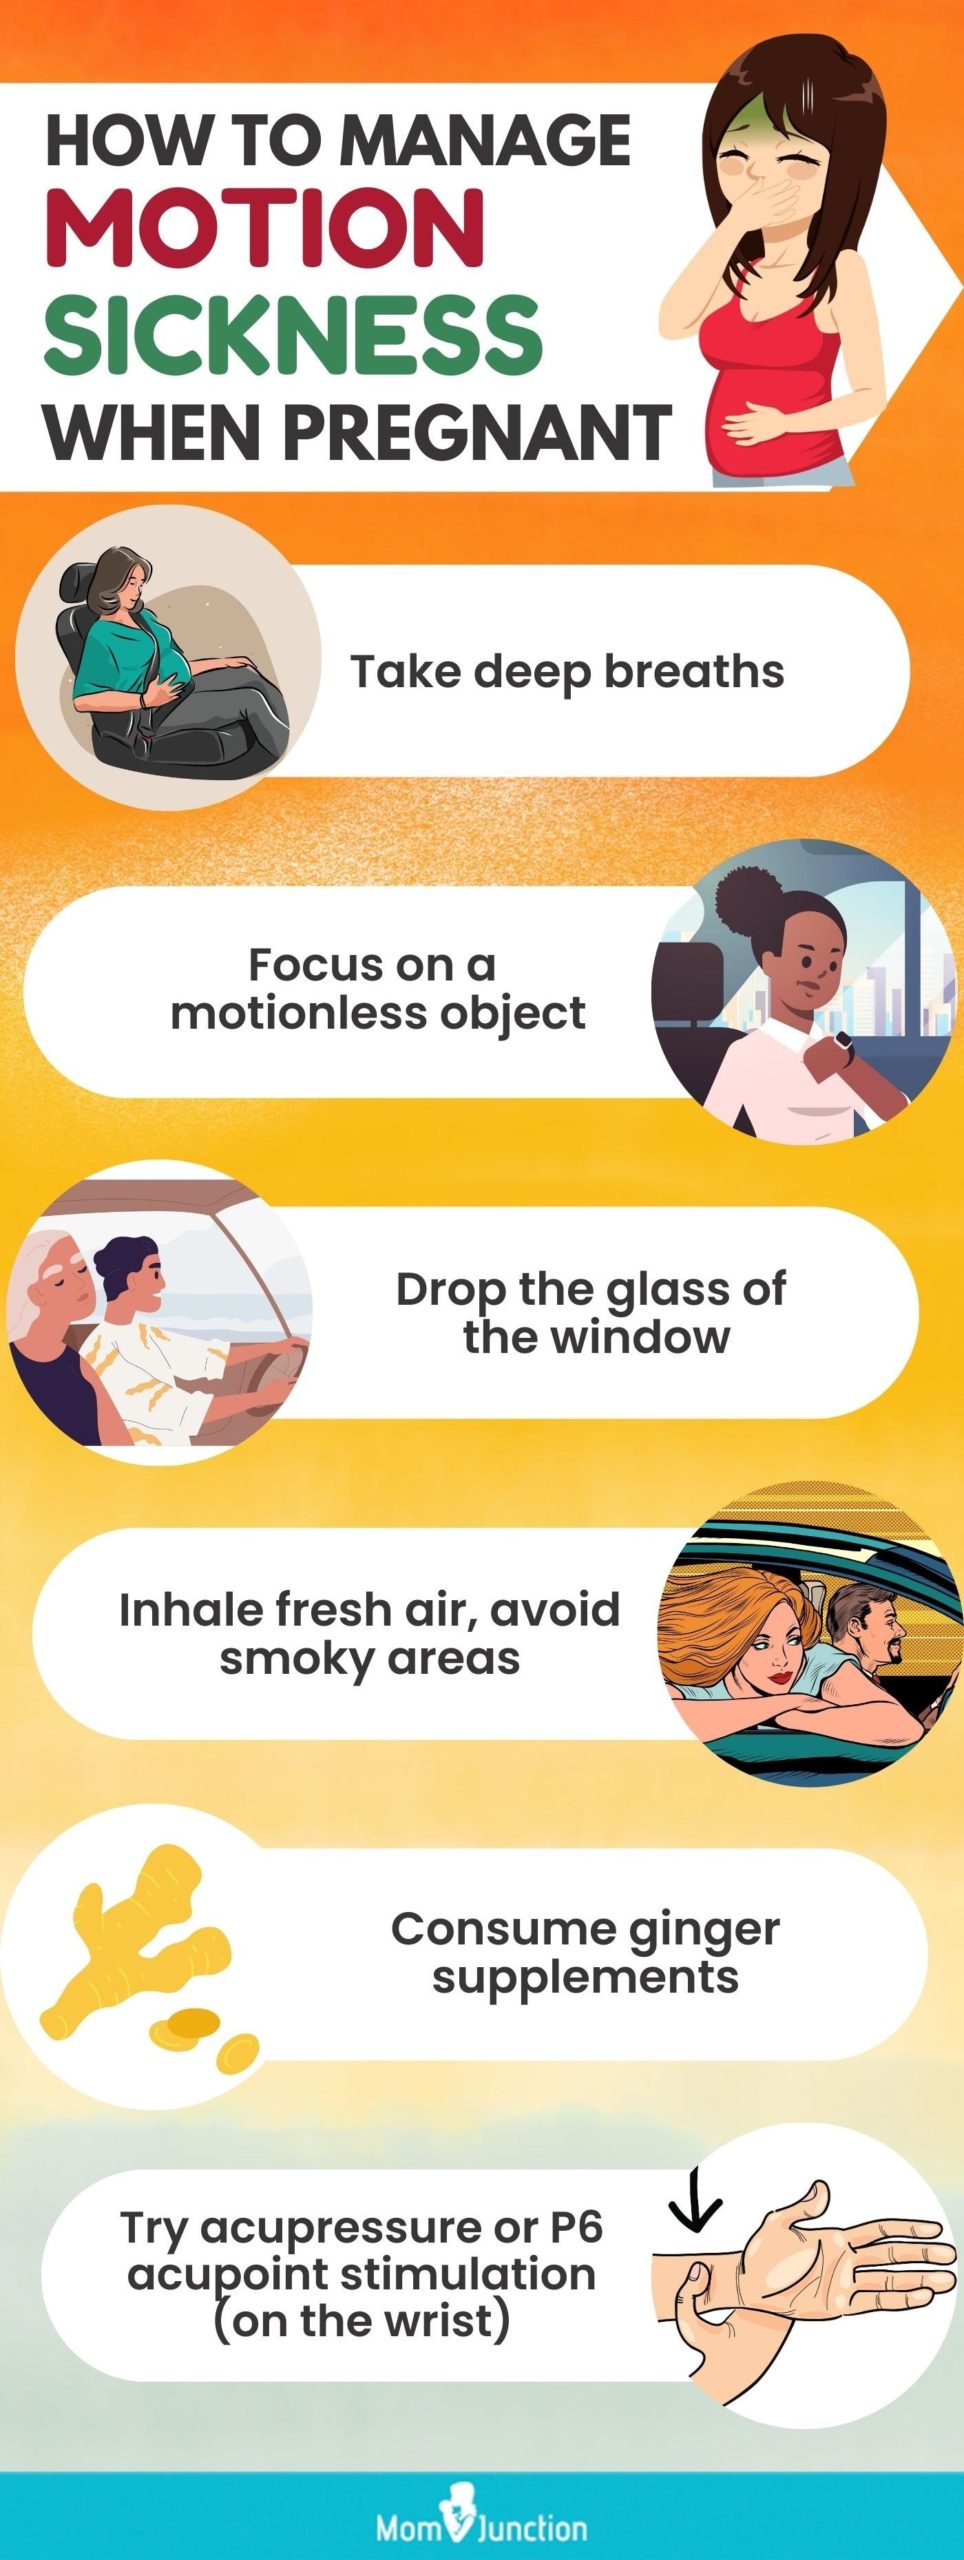 how to manage motion sickness when pregnant [infographic]